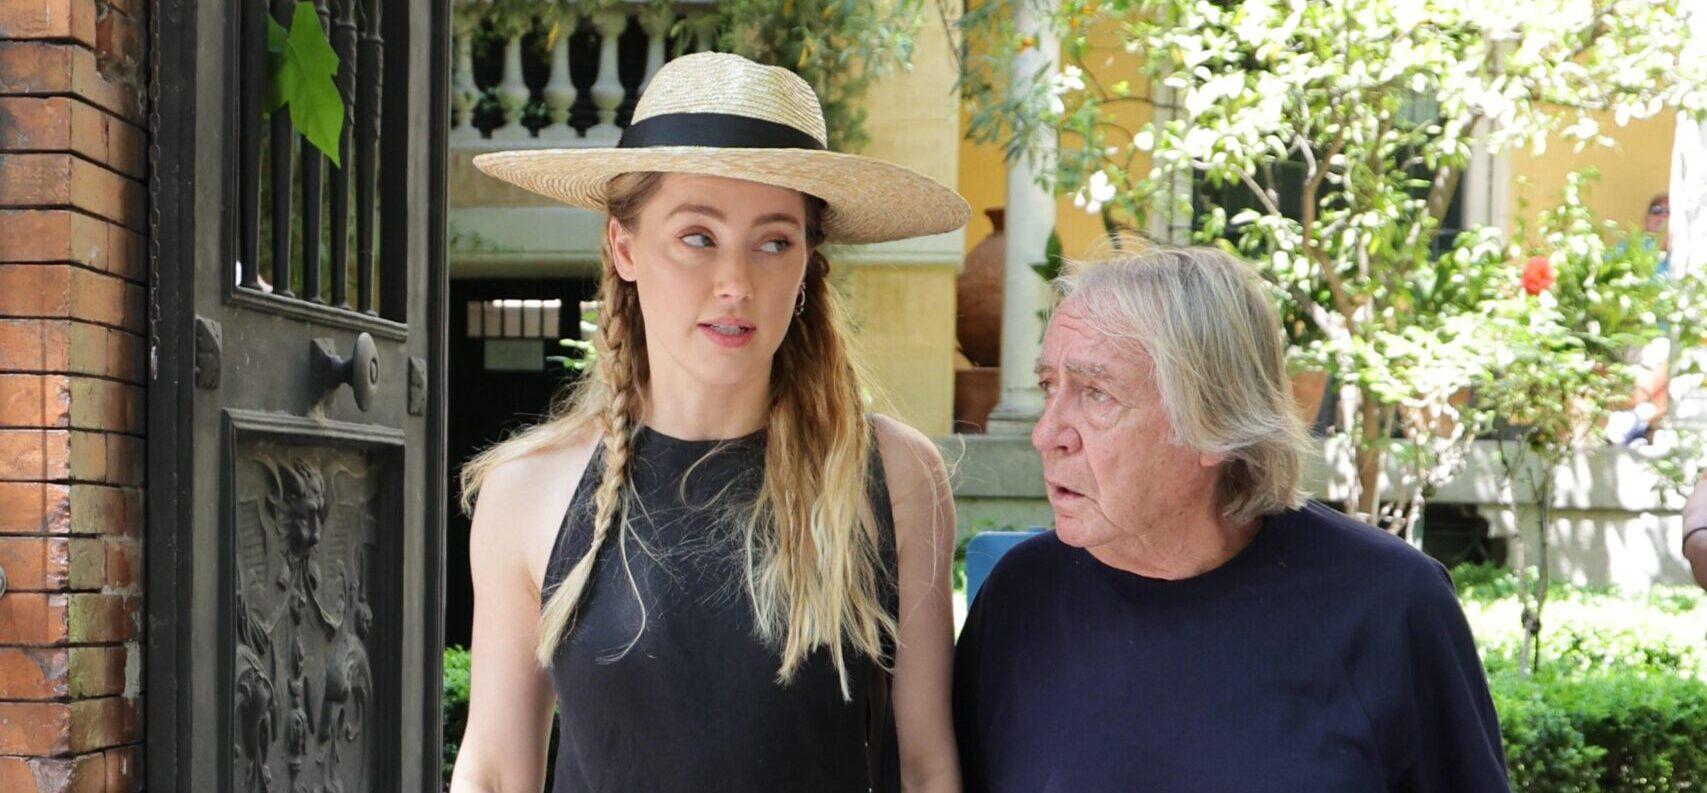 Amber Heard Smiles Awkwardly In Madrid After National Police Leave Her Home